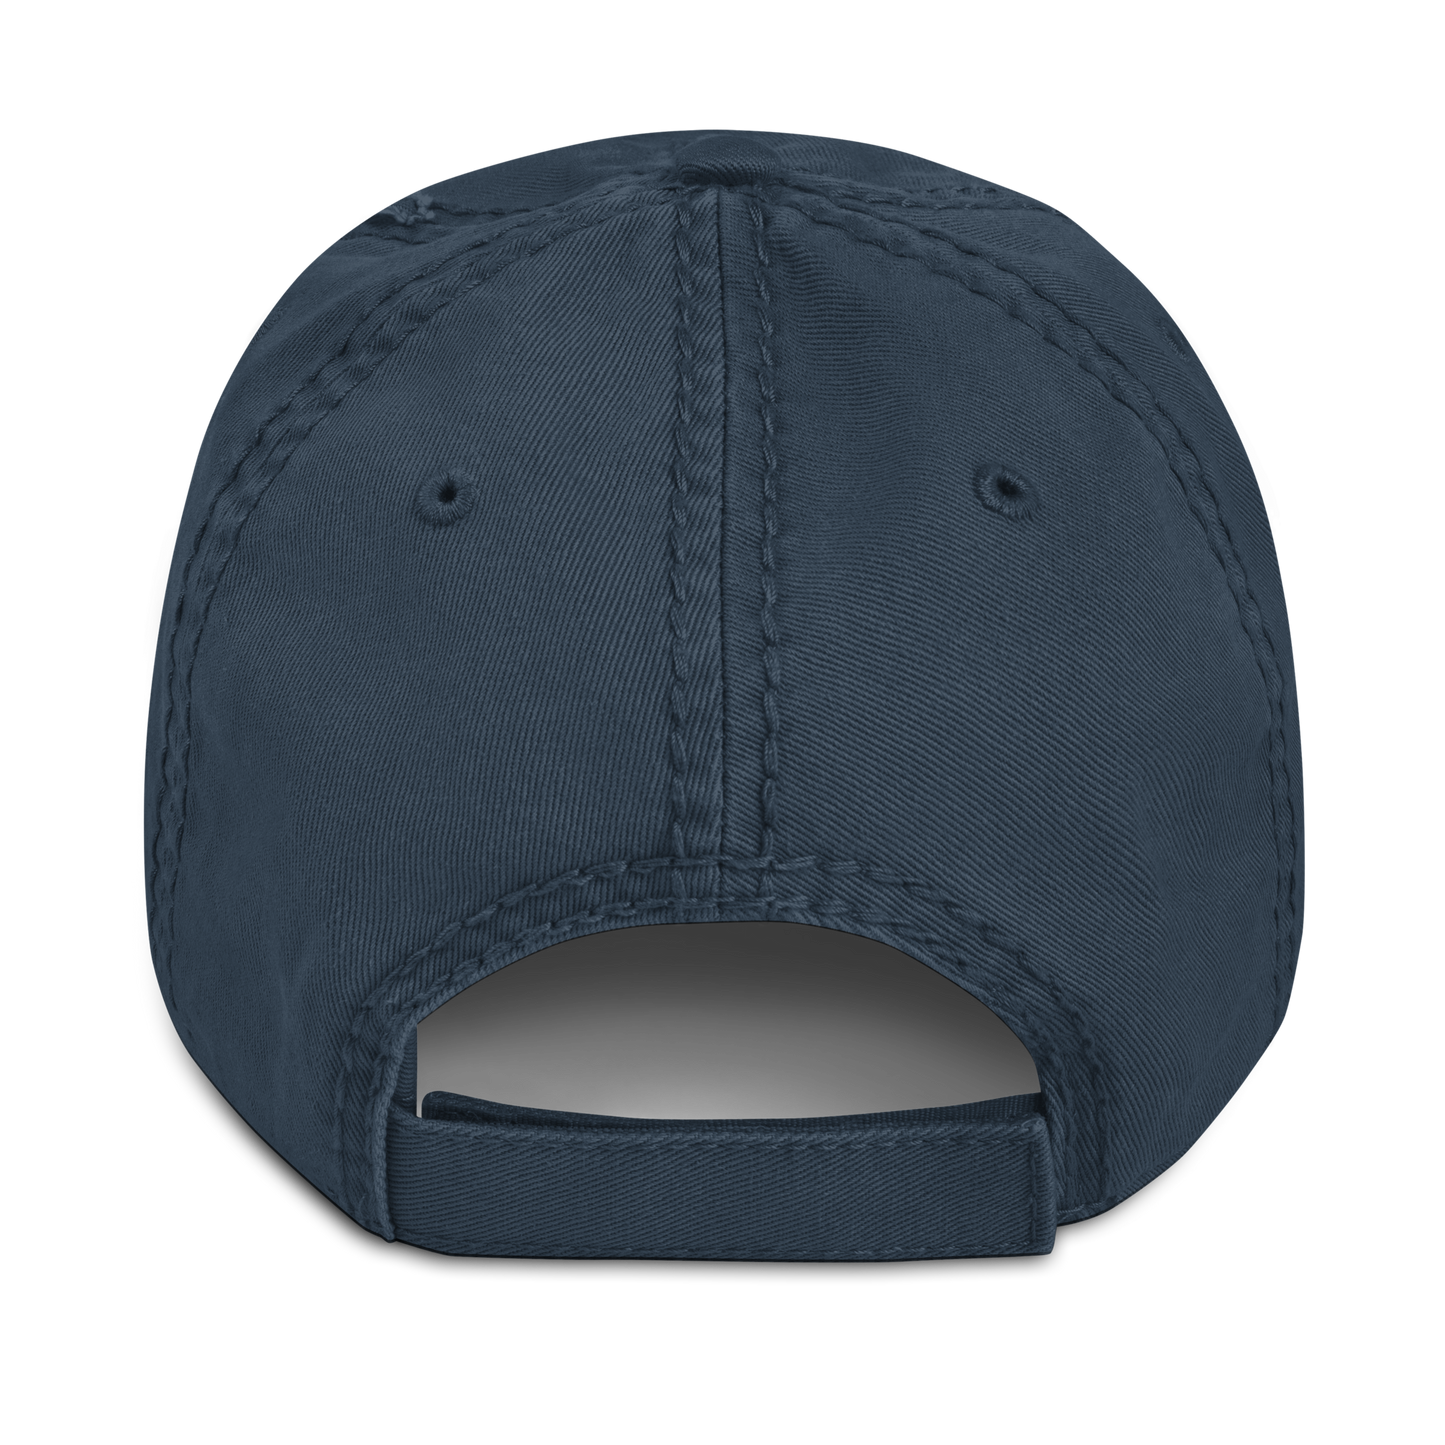 Great Lakes Distressed Dad Hat (Maize)